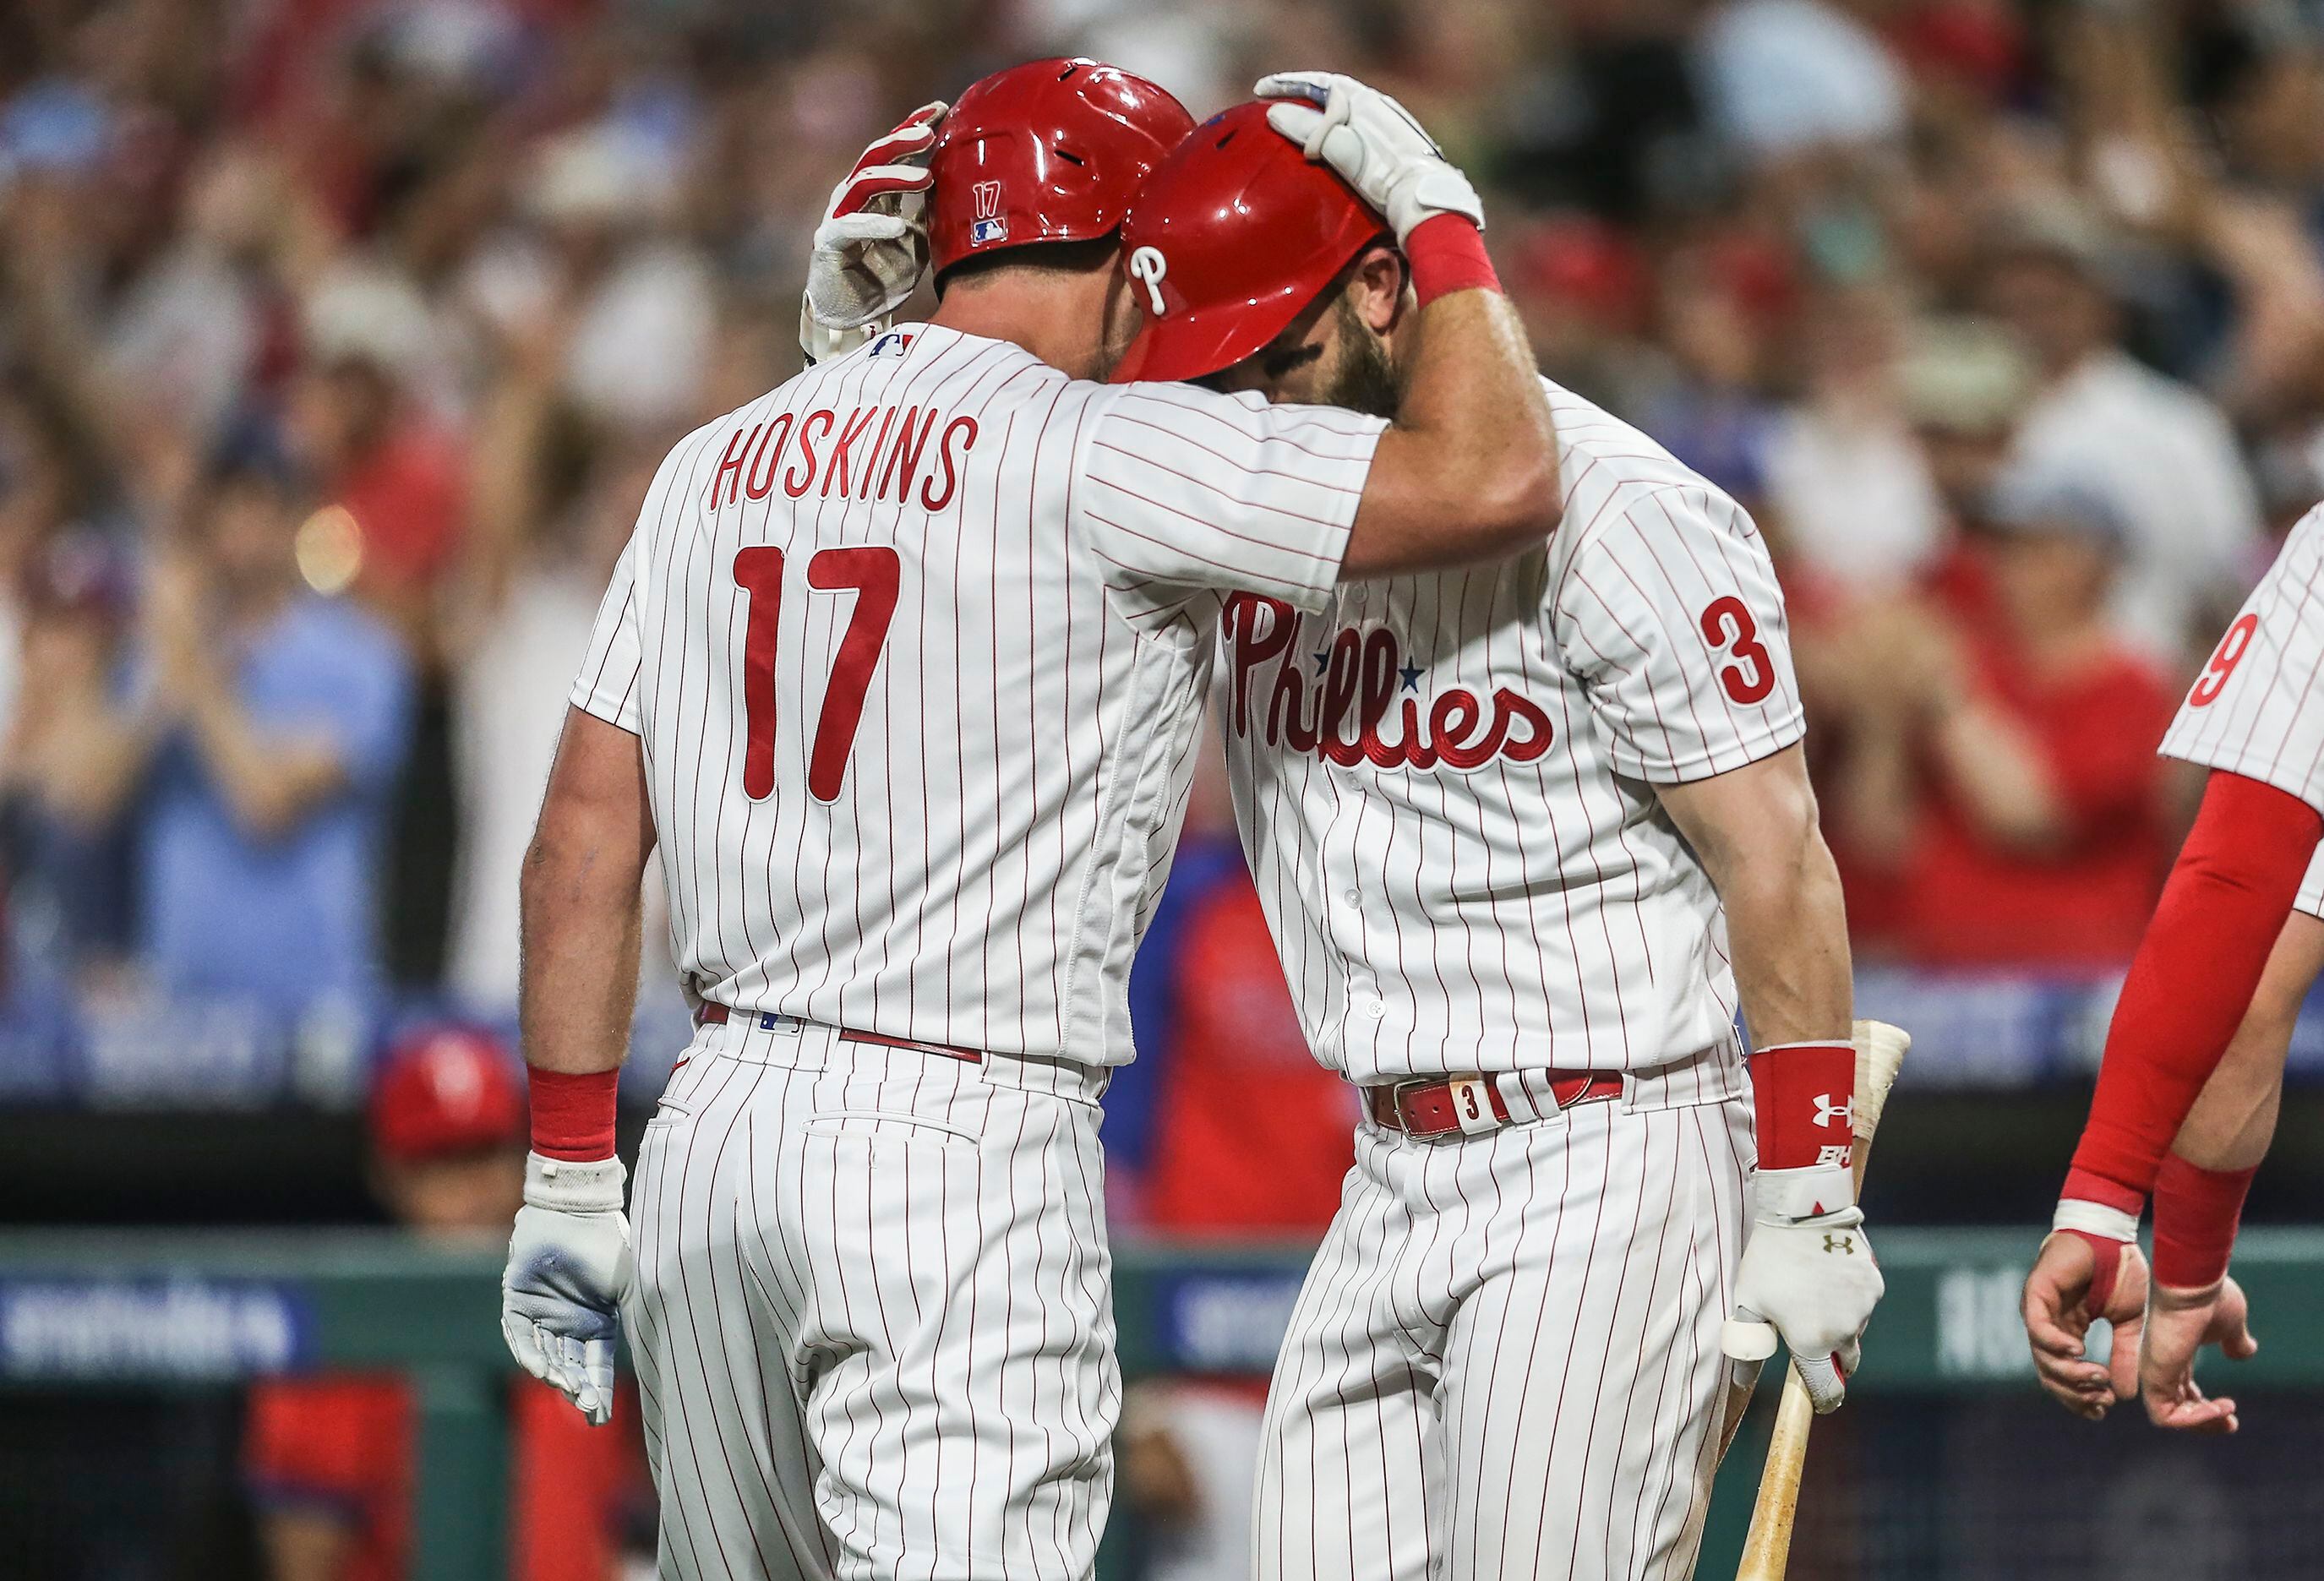 Phillies walk off for comeback win after 3-run 9th